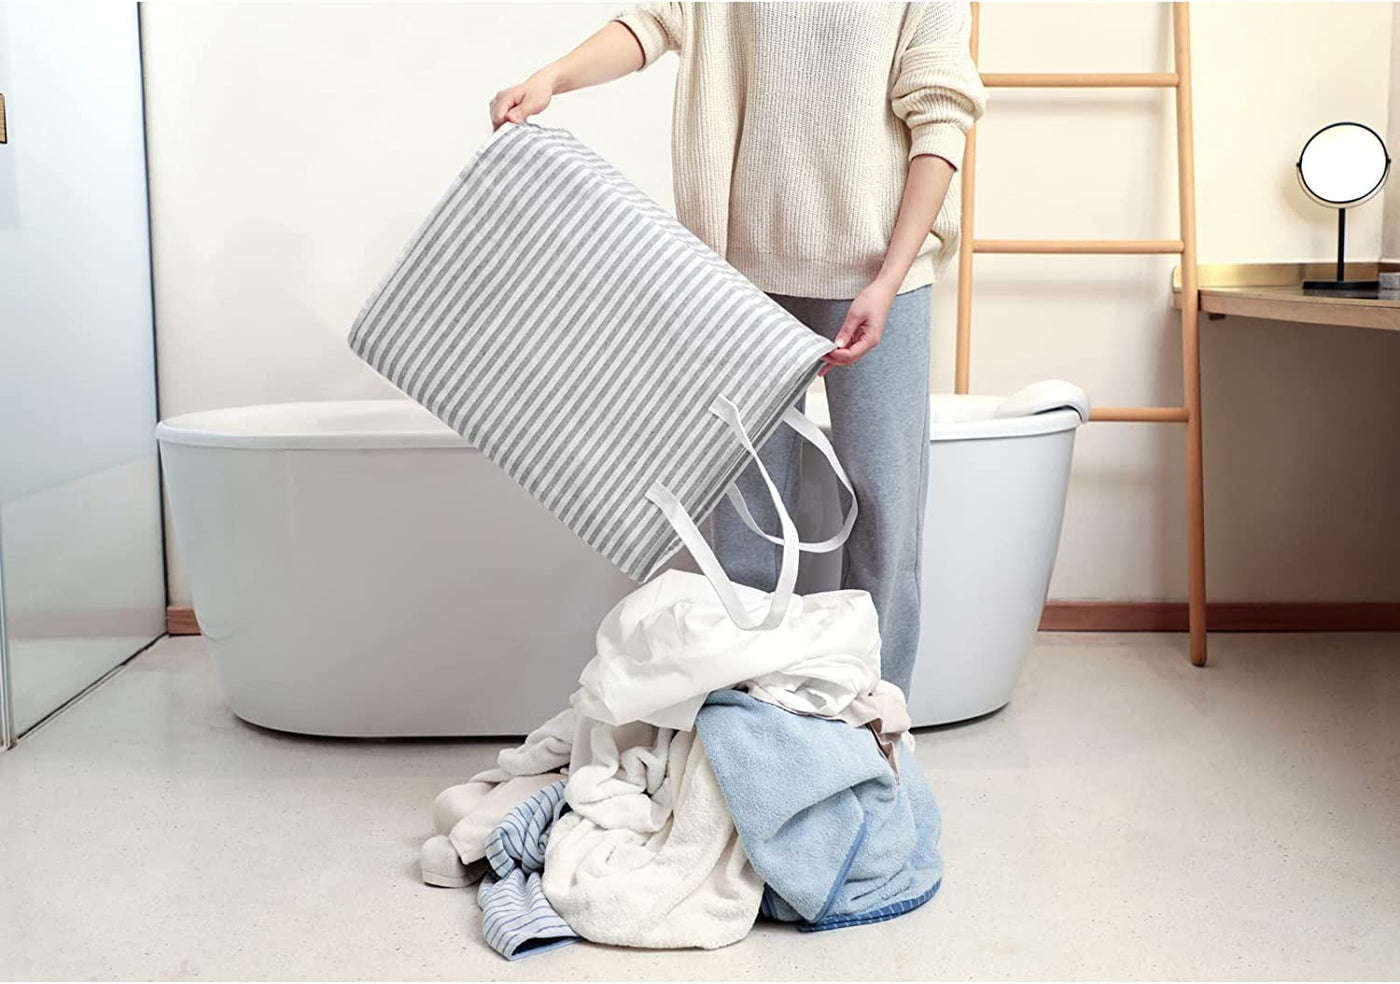 Waterproof Laundry Hamper Collapsible Baskets with Easy Carry Handles Extra Large - White Grey Stripe